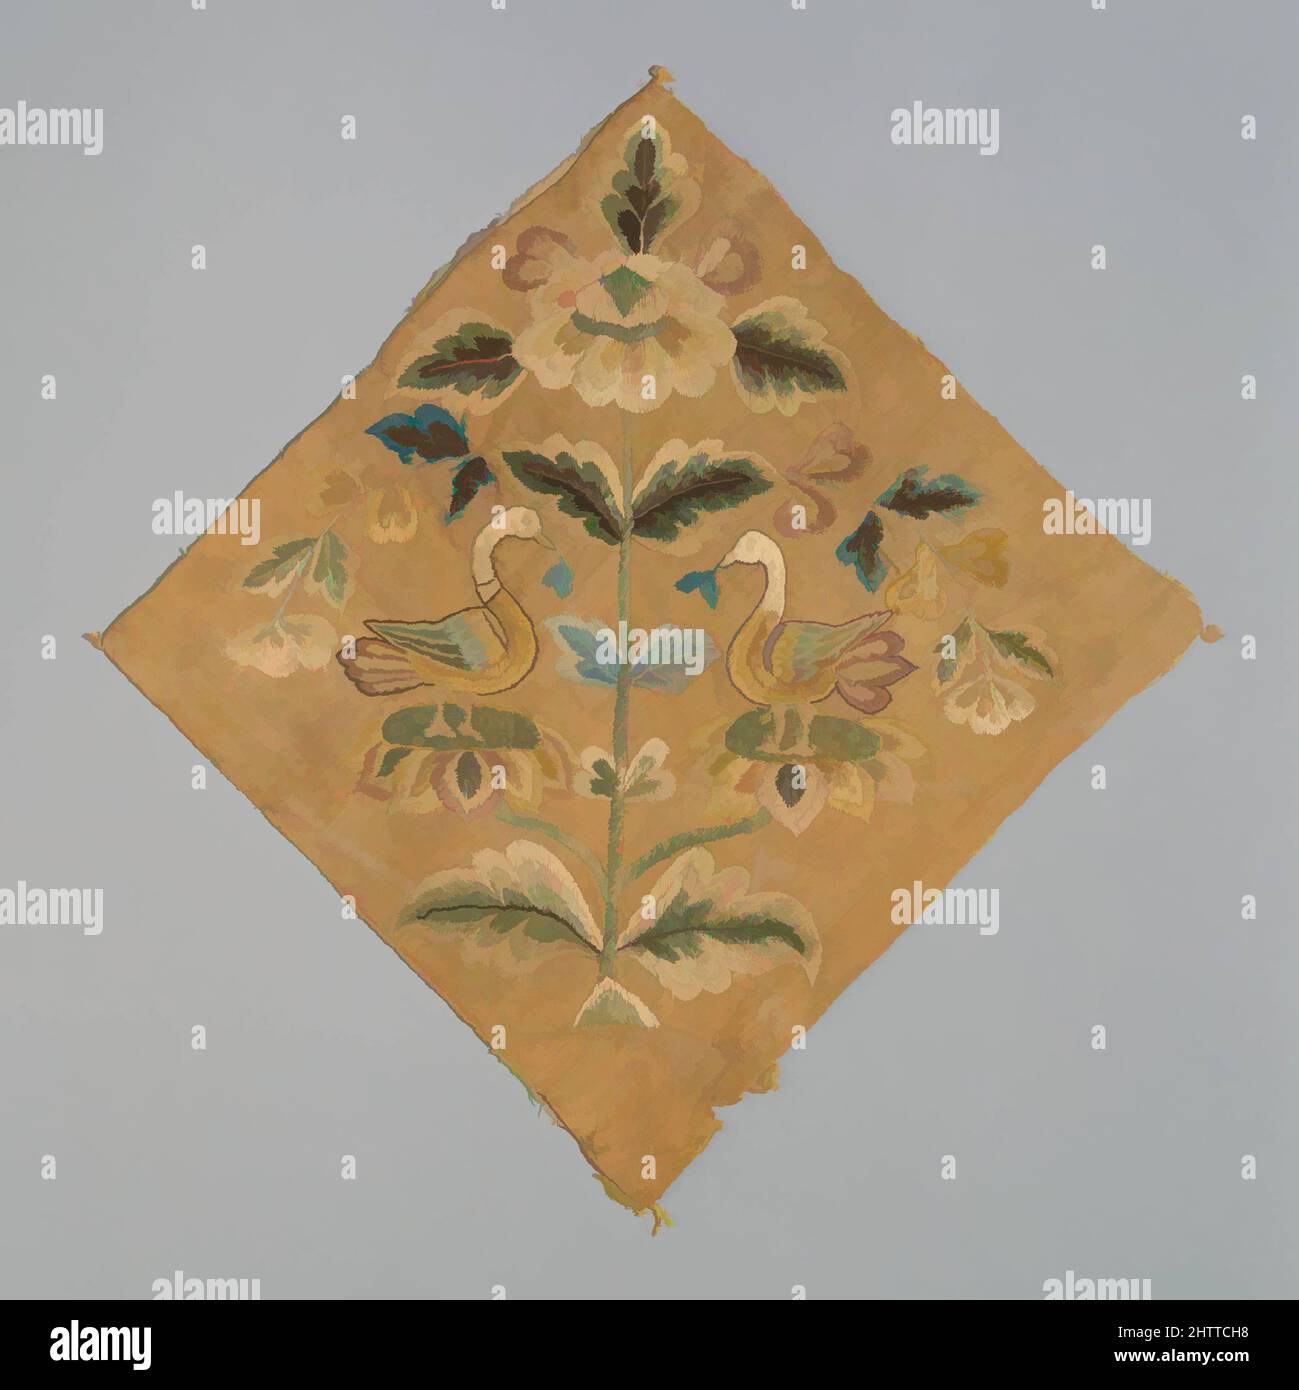 Art inspired by Textile with Confronted Birds, Tang dynasty (618–907), early 8th century, China, Silk embroidery on plain-weave silk, Overall: 12 1/4 x 12 1/8 in. (31.1 x 30.8 cm), Textiles-Embroidered, Although symmetry is a basic element of Chinese design, the motif of a pair of, Classic works modernized by Artotop with a splash of modernity. Shapes, color and value, eye-catching visual impact on art. Emotions through freedom of artworks in a contemporary way. A timeless message pursuing a wildly creative new direction. Artists turning to the digital medium and creating the Artotop NFT Stock Photo